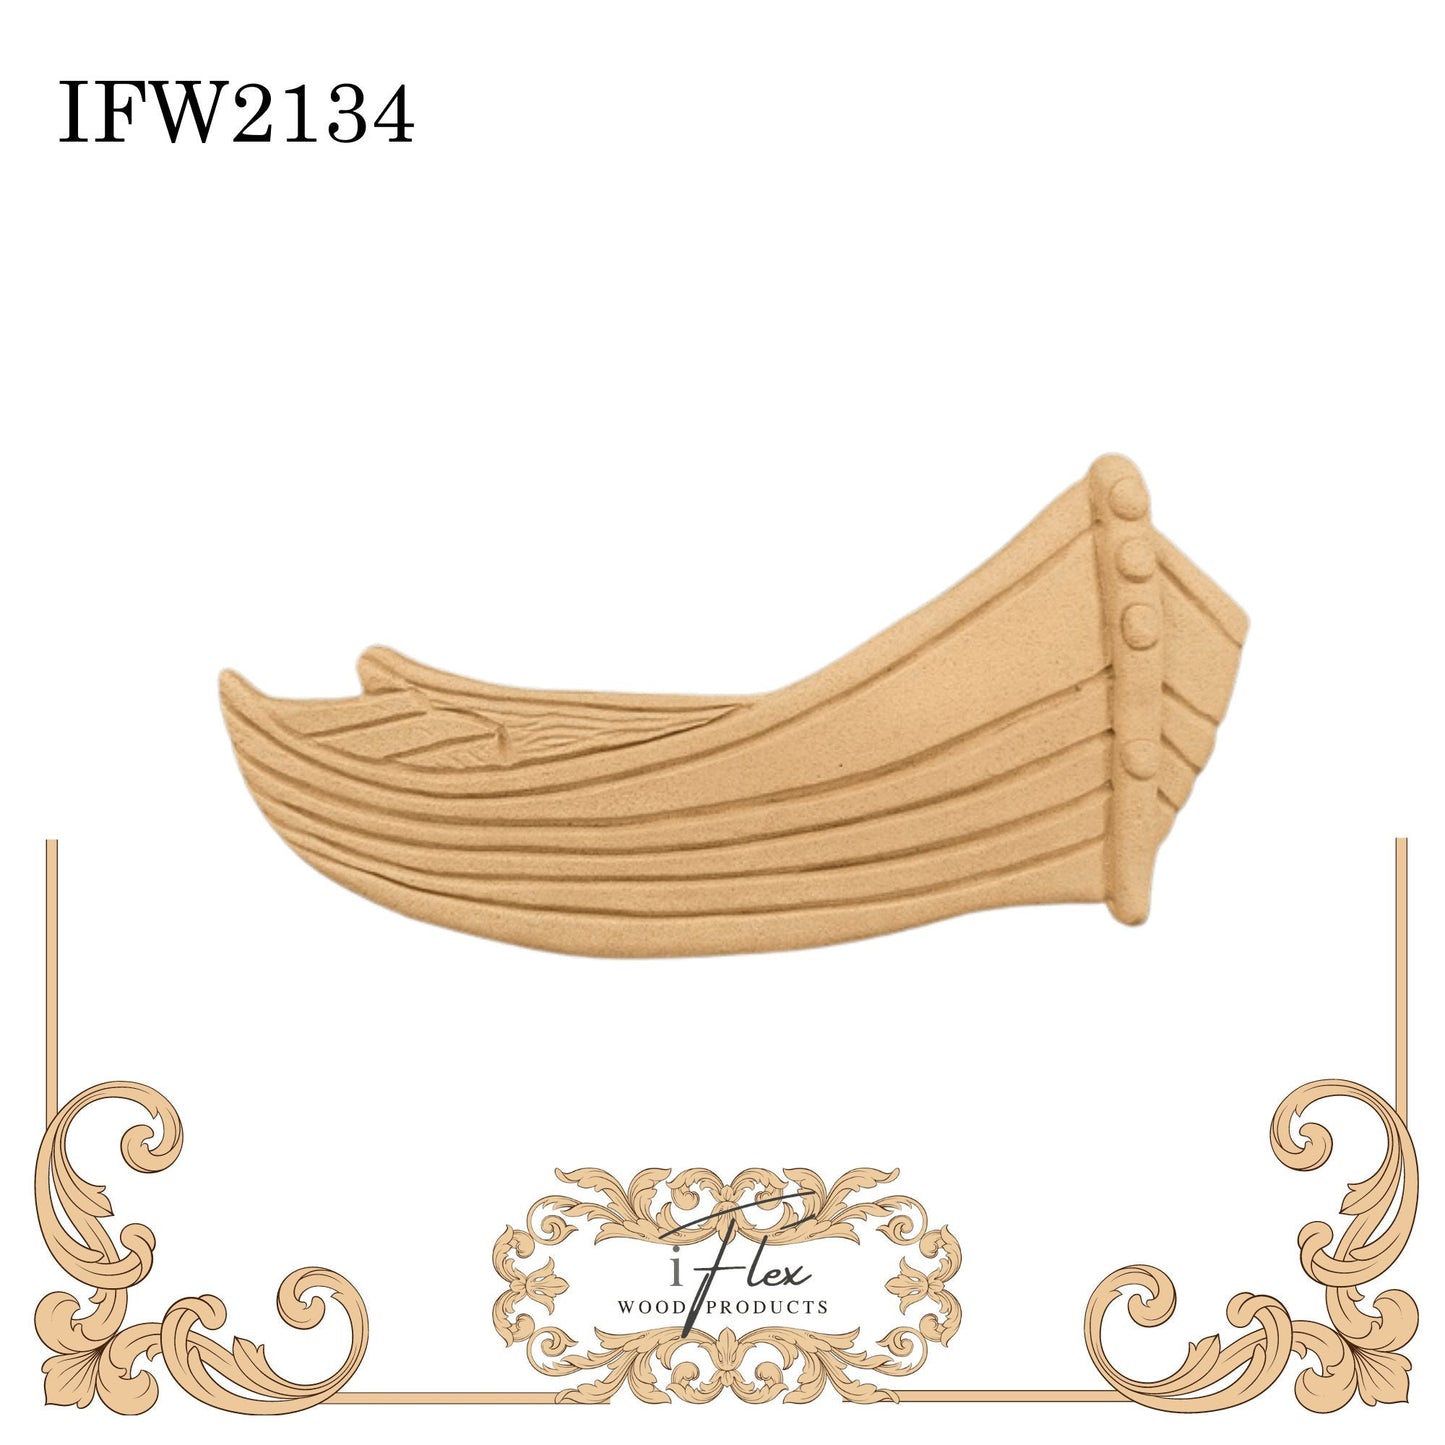 IFW 2134 iFlex Wood Products, bendable mouldings, flexible, wooden appliques, nautical boat